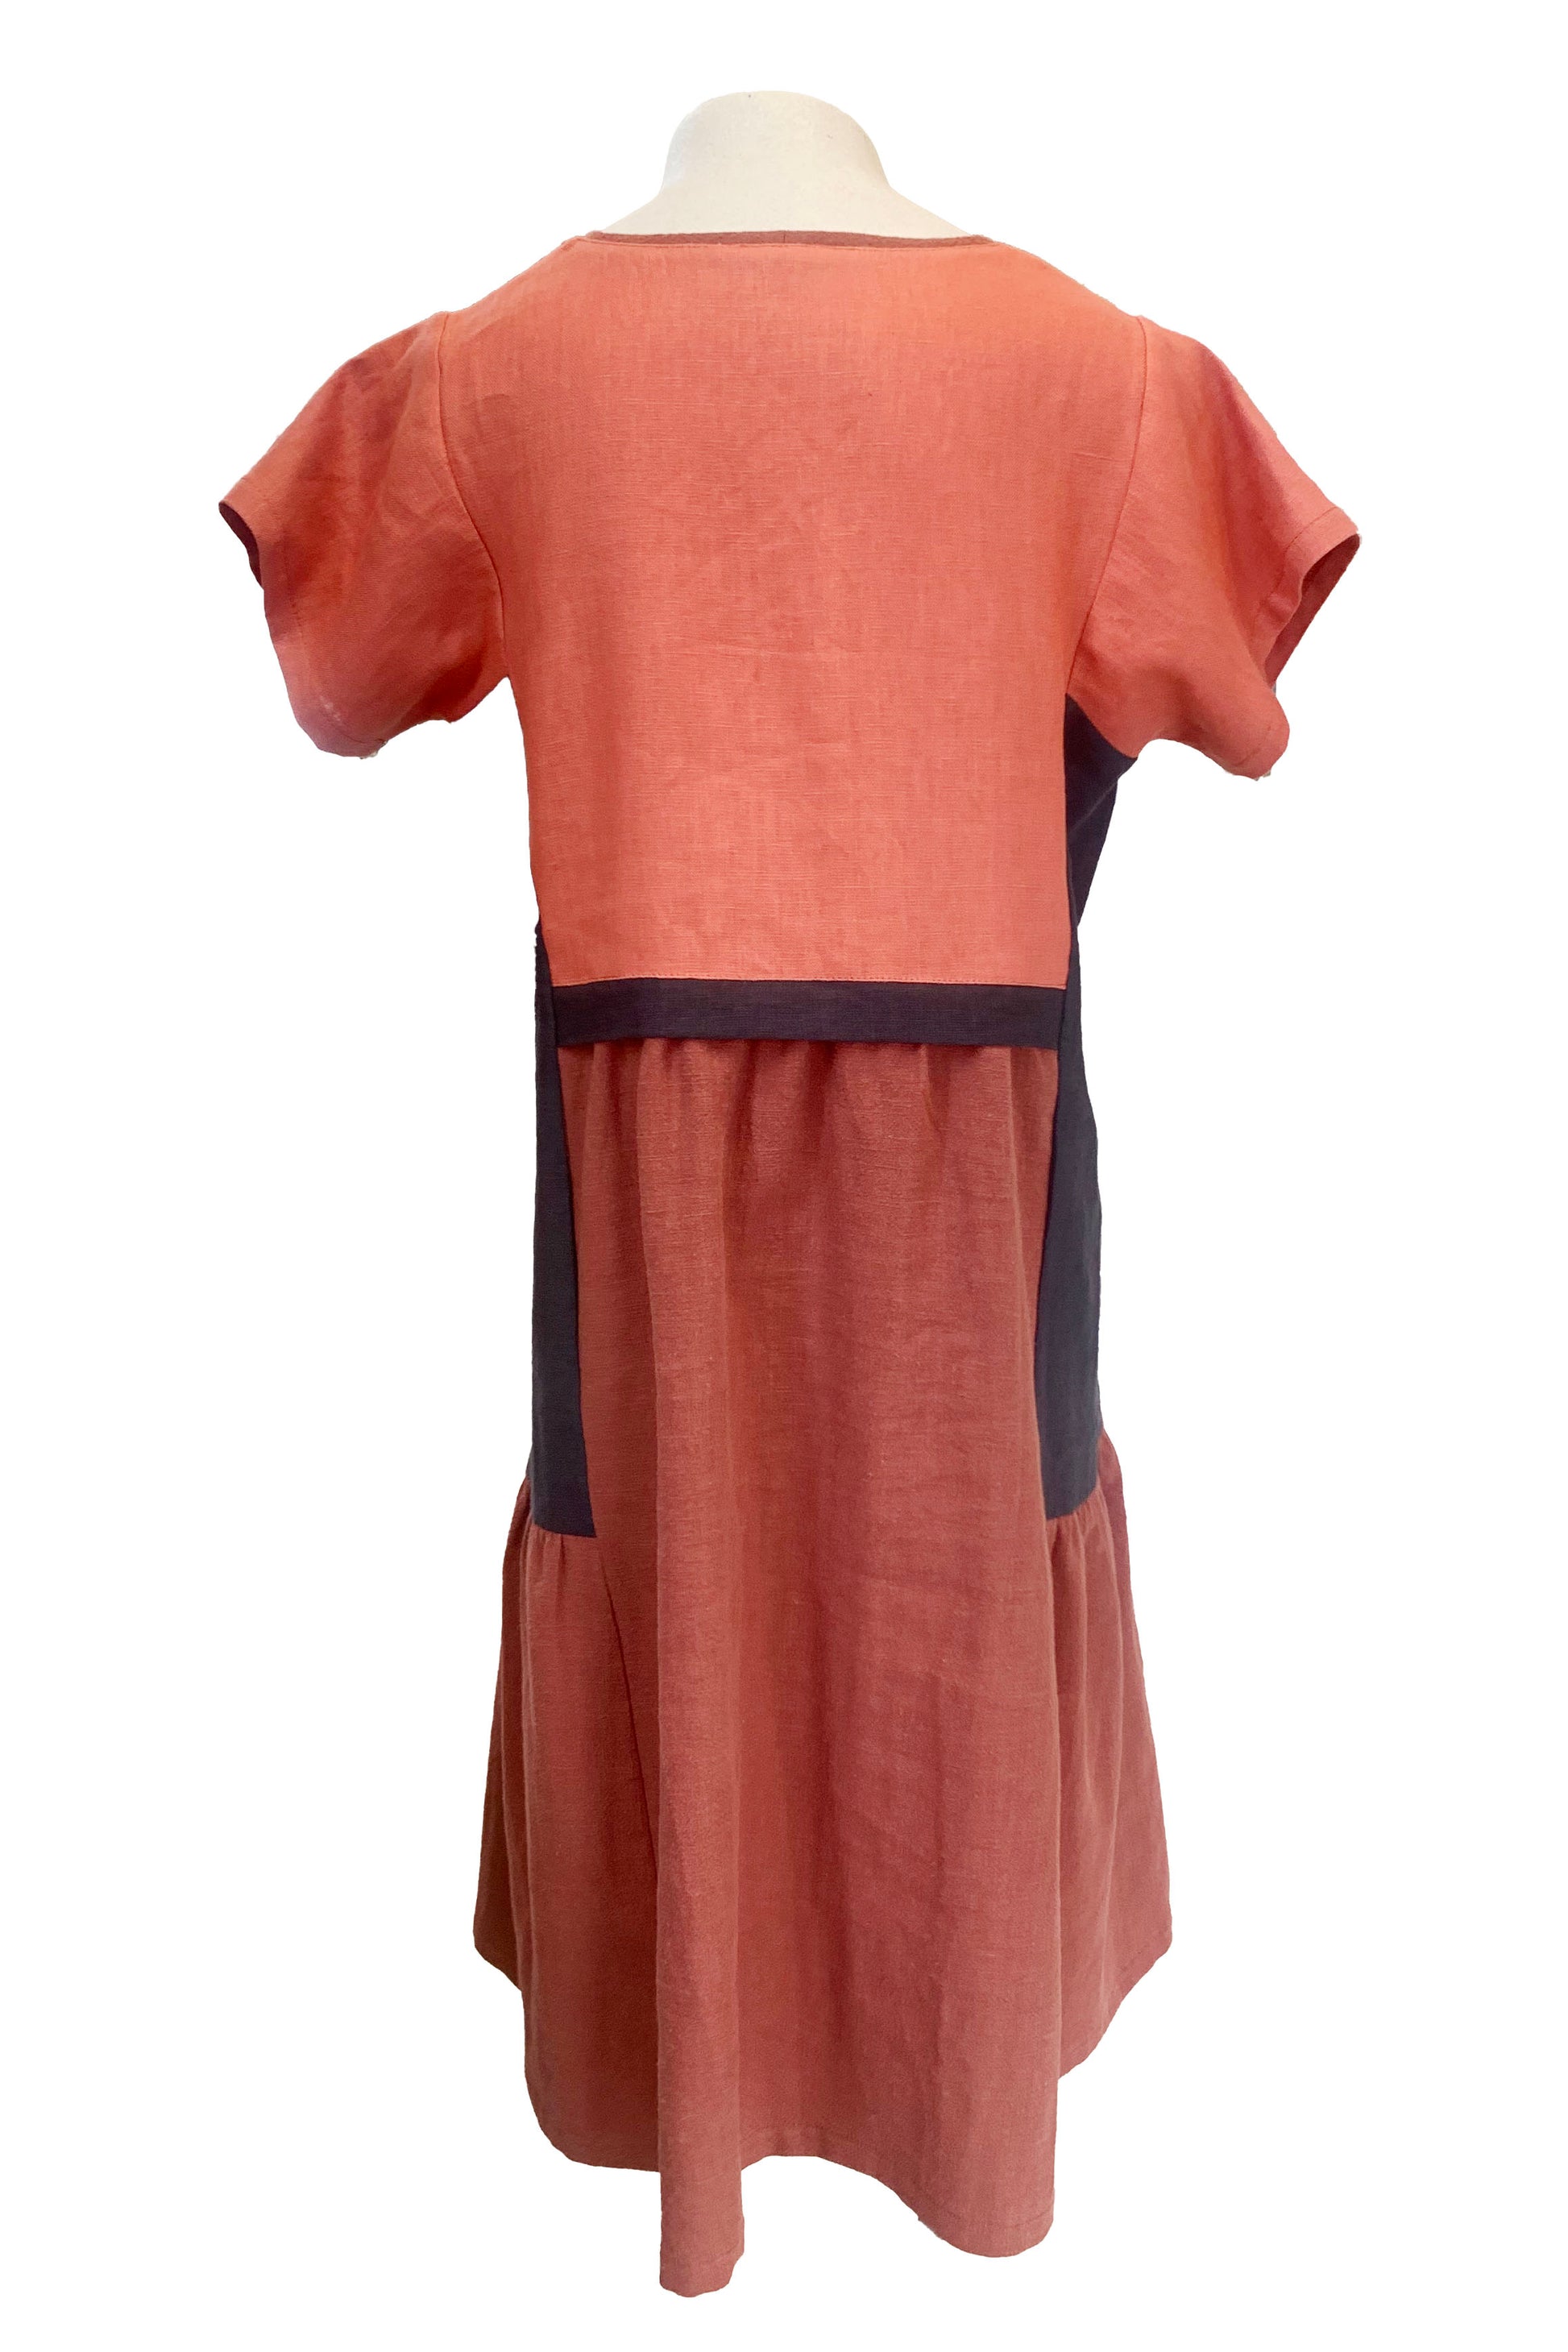 Alexis Dress by Solomia, Orange/Brown, back view, round neck, short sleeves, above the knee length, colour-blocked, darts at bust, gathers at waist and sides, pockets on front seams, eco-fabric, 100% linen, sizes S to XL, made in Carleton Place